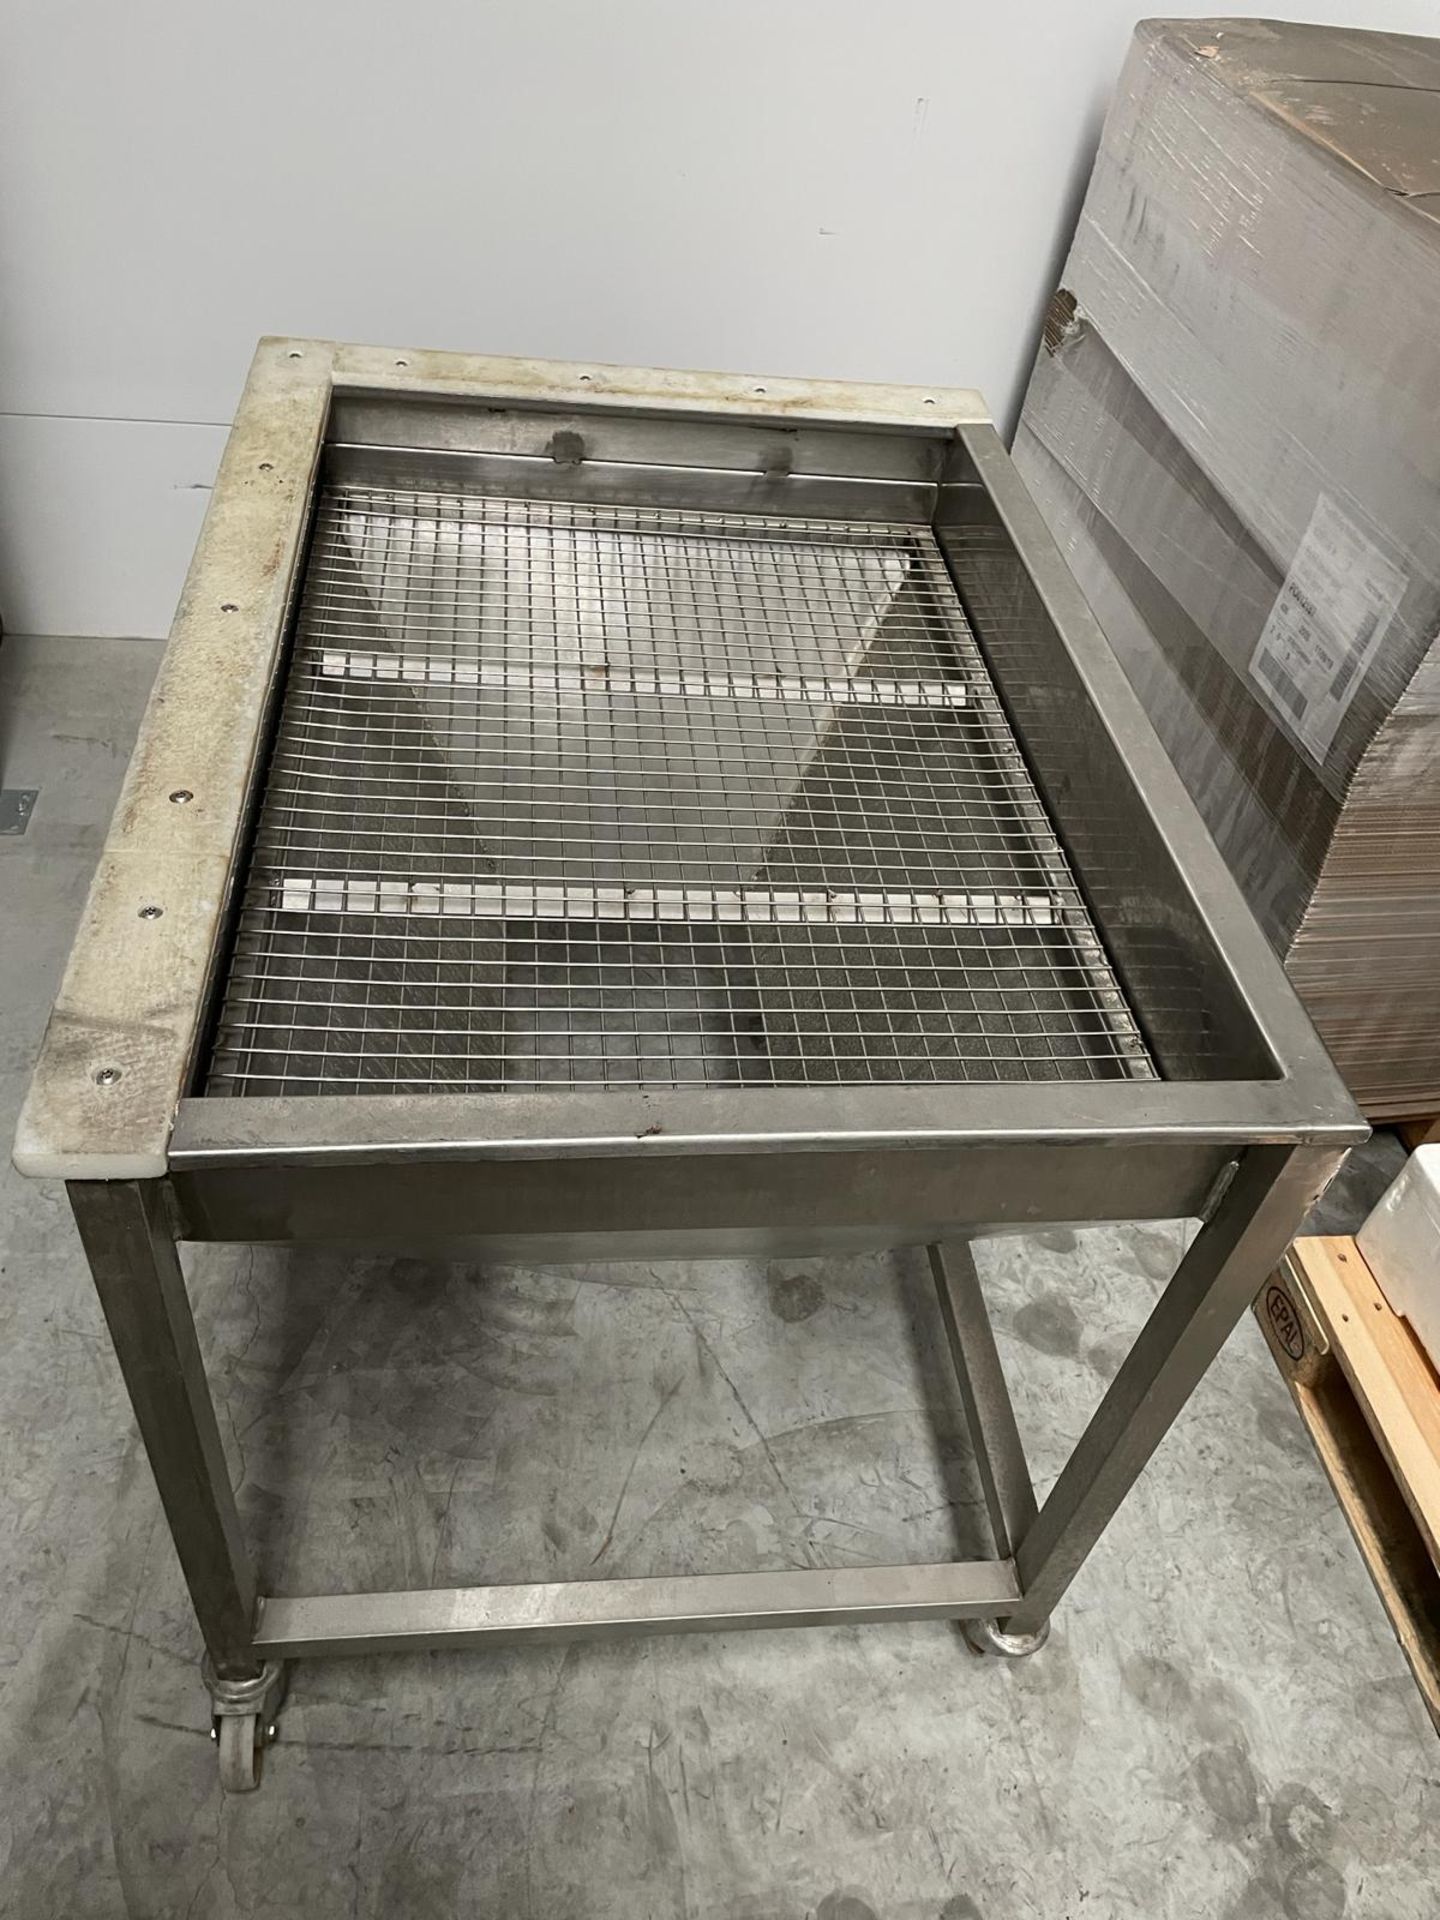 Stainless Steel tapered chute with grid top, potential wash down unit. 1100 x 850 mm. Please note